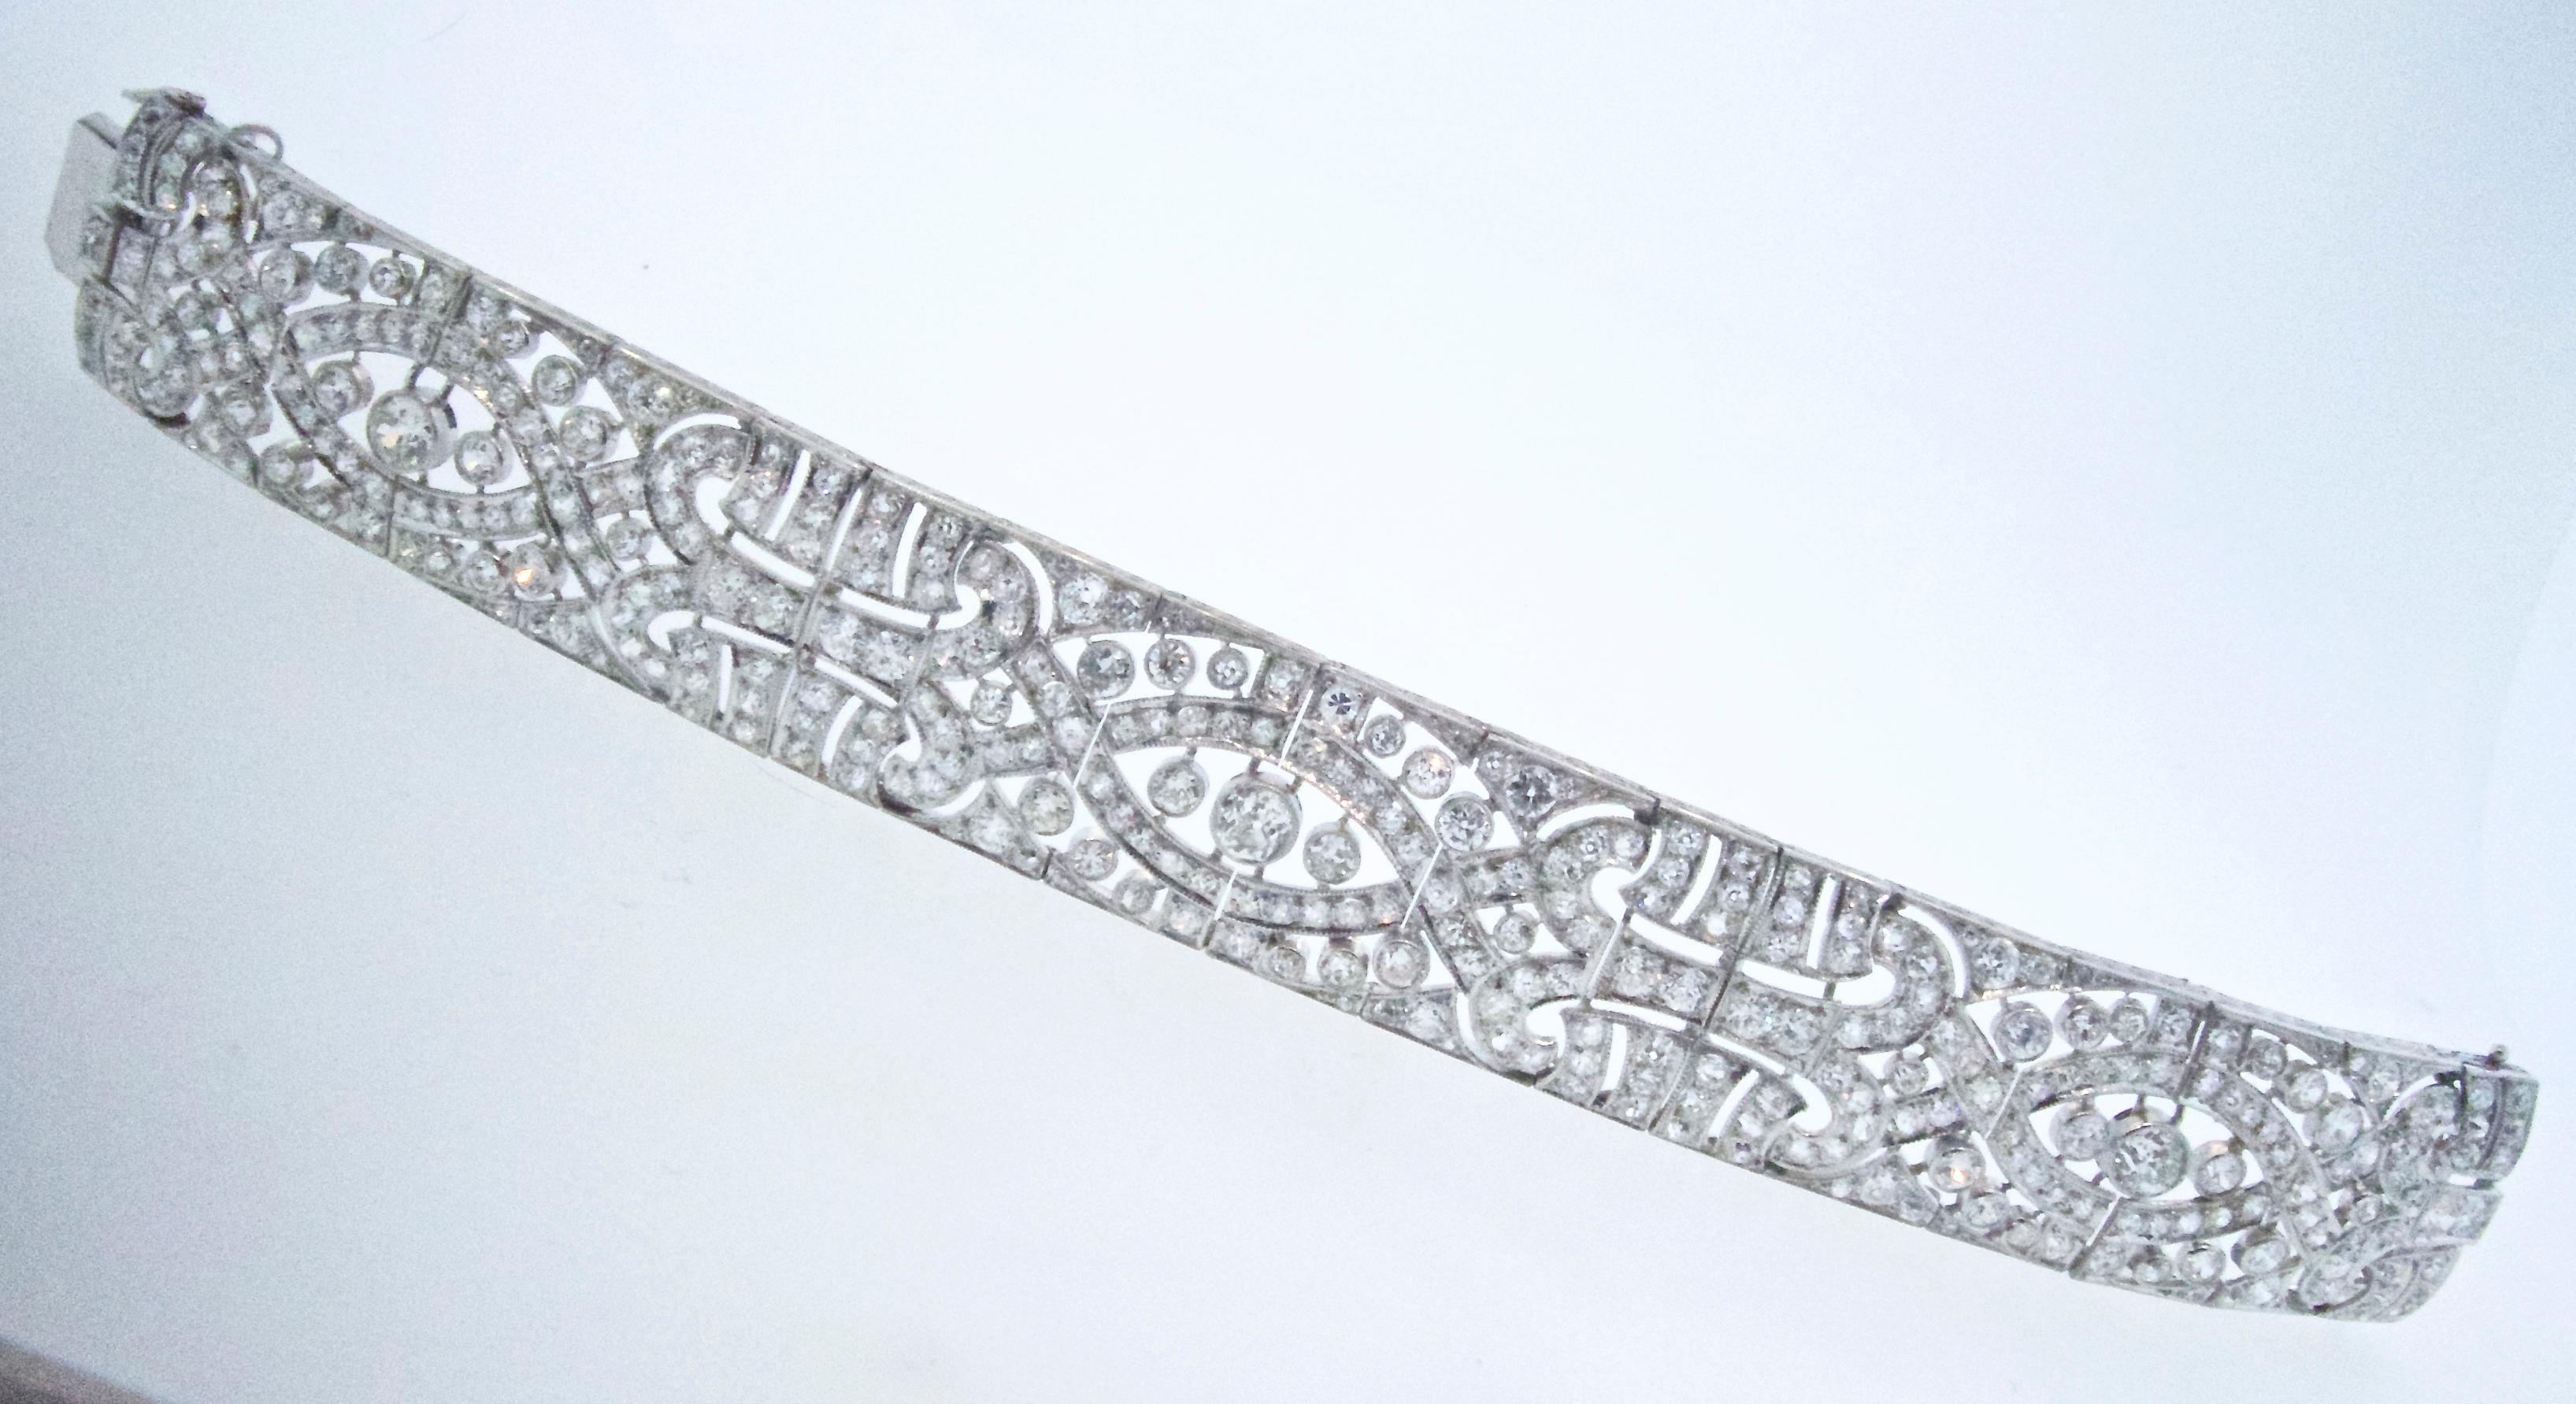 Diamond and platinum Art Deco wide bracelet with 348 older European cut diamonds all well cut and well matched and weighing approximately 22.5 cts.  All the European cut diamonds are well matched, near colorless (H) and very slightly included (VS).